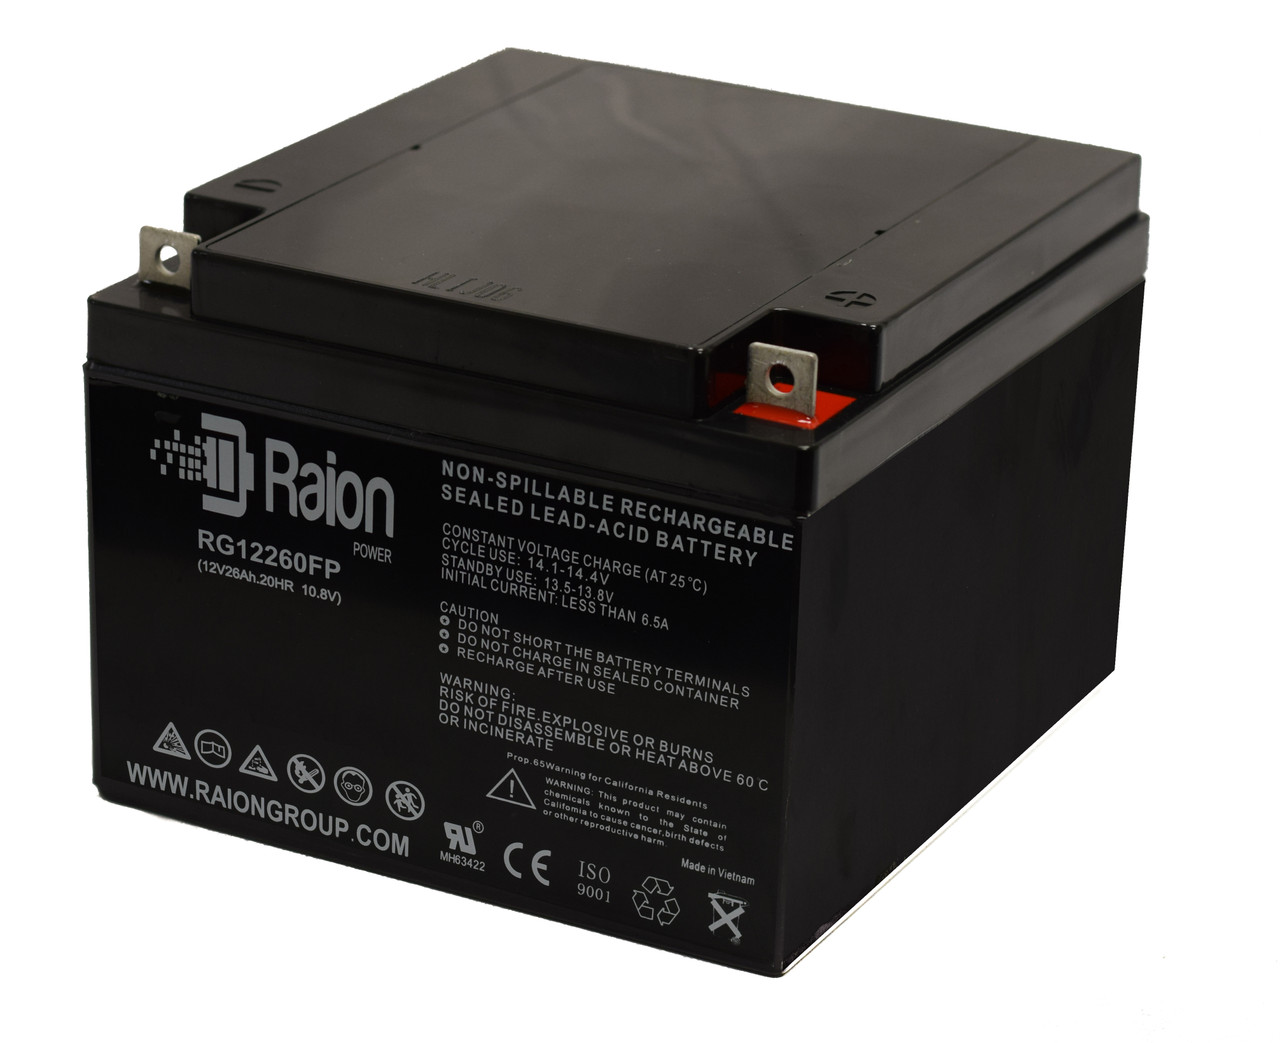 Raion Power Replacement 12V 26Ah Battery for Sigmas SP12-28 - 1 Pack